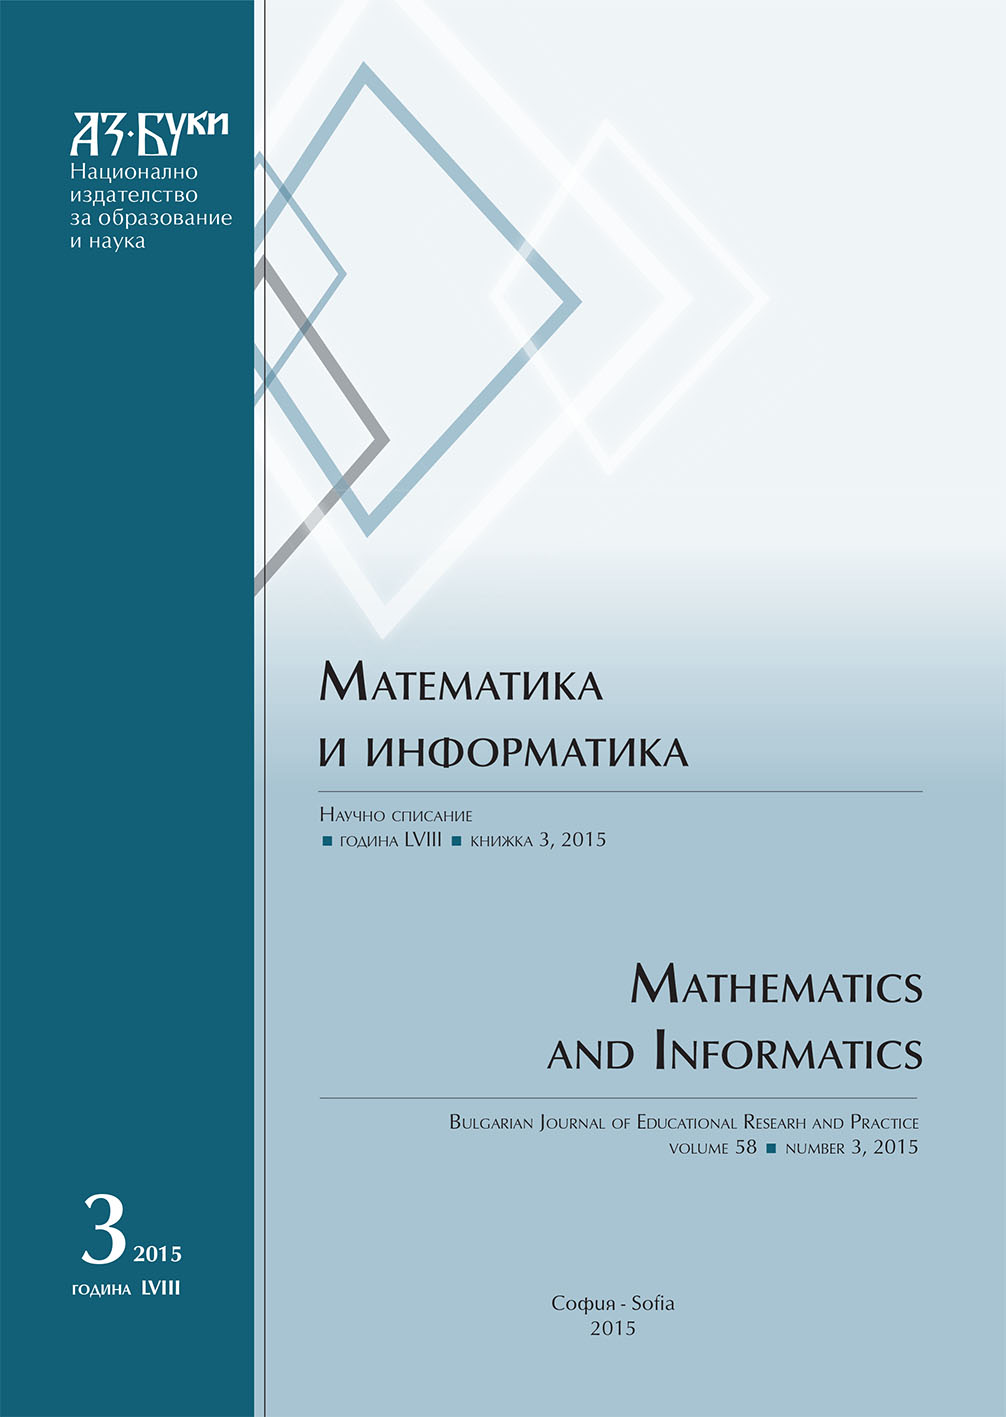 Elementary Arithmetic Problems. Structure and Mathematical Model. Classification. Word problems Cover Image